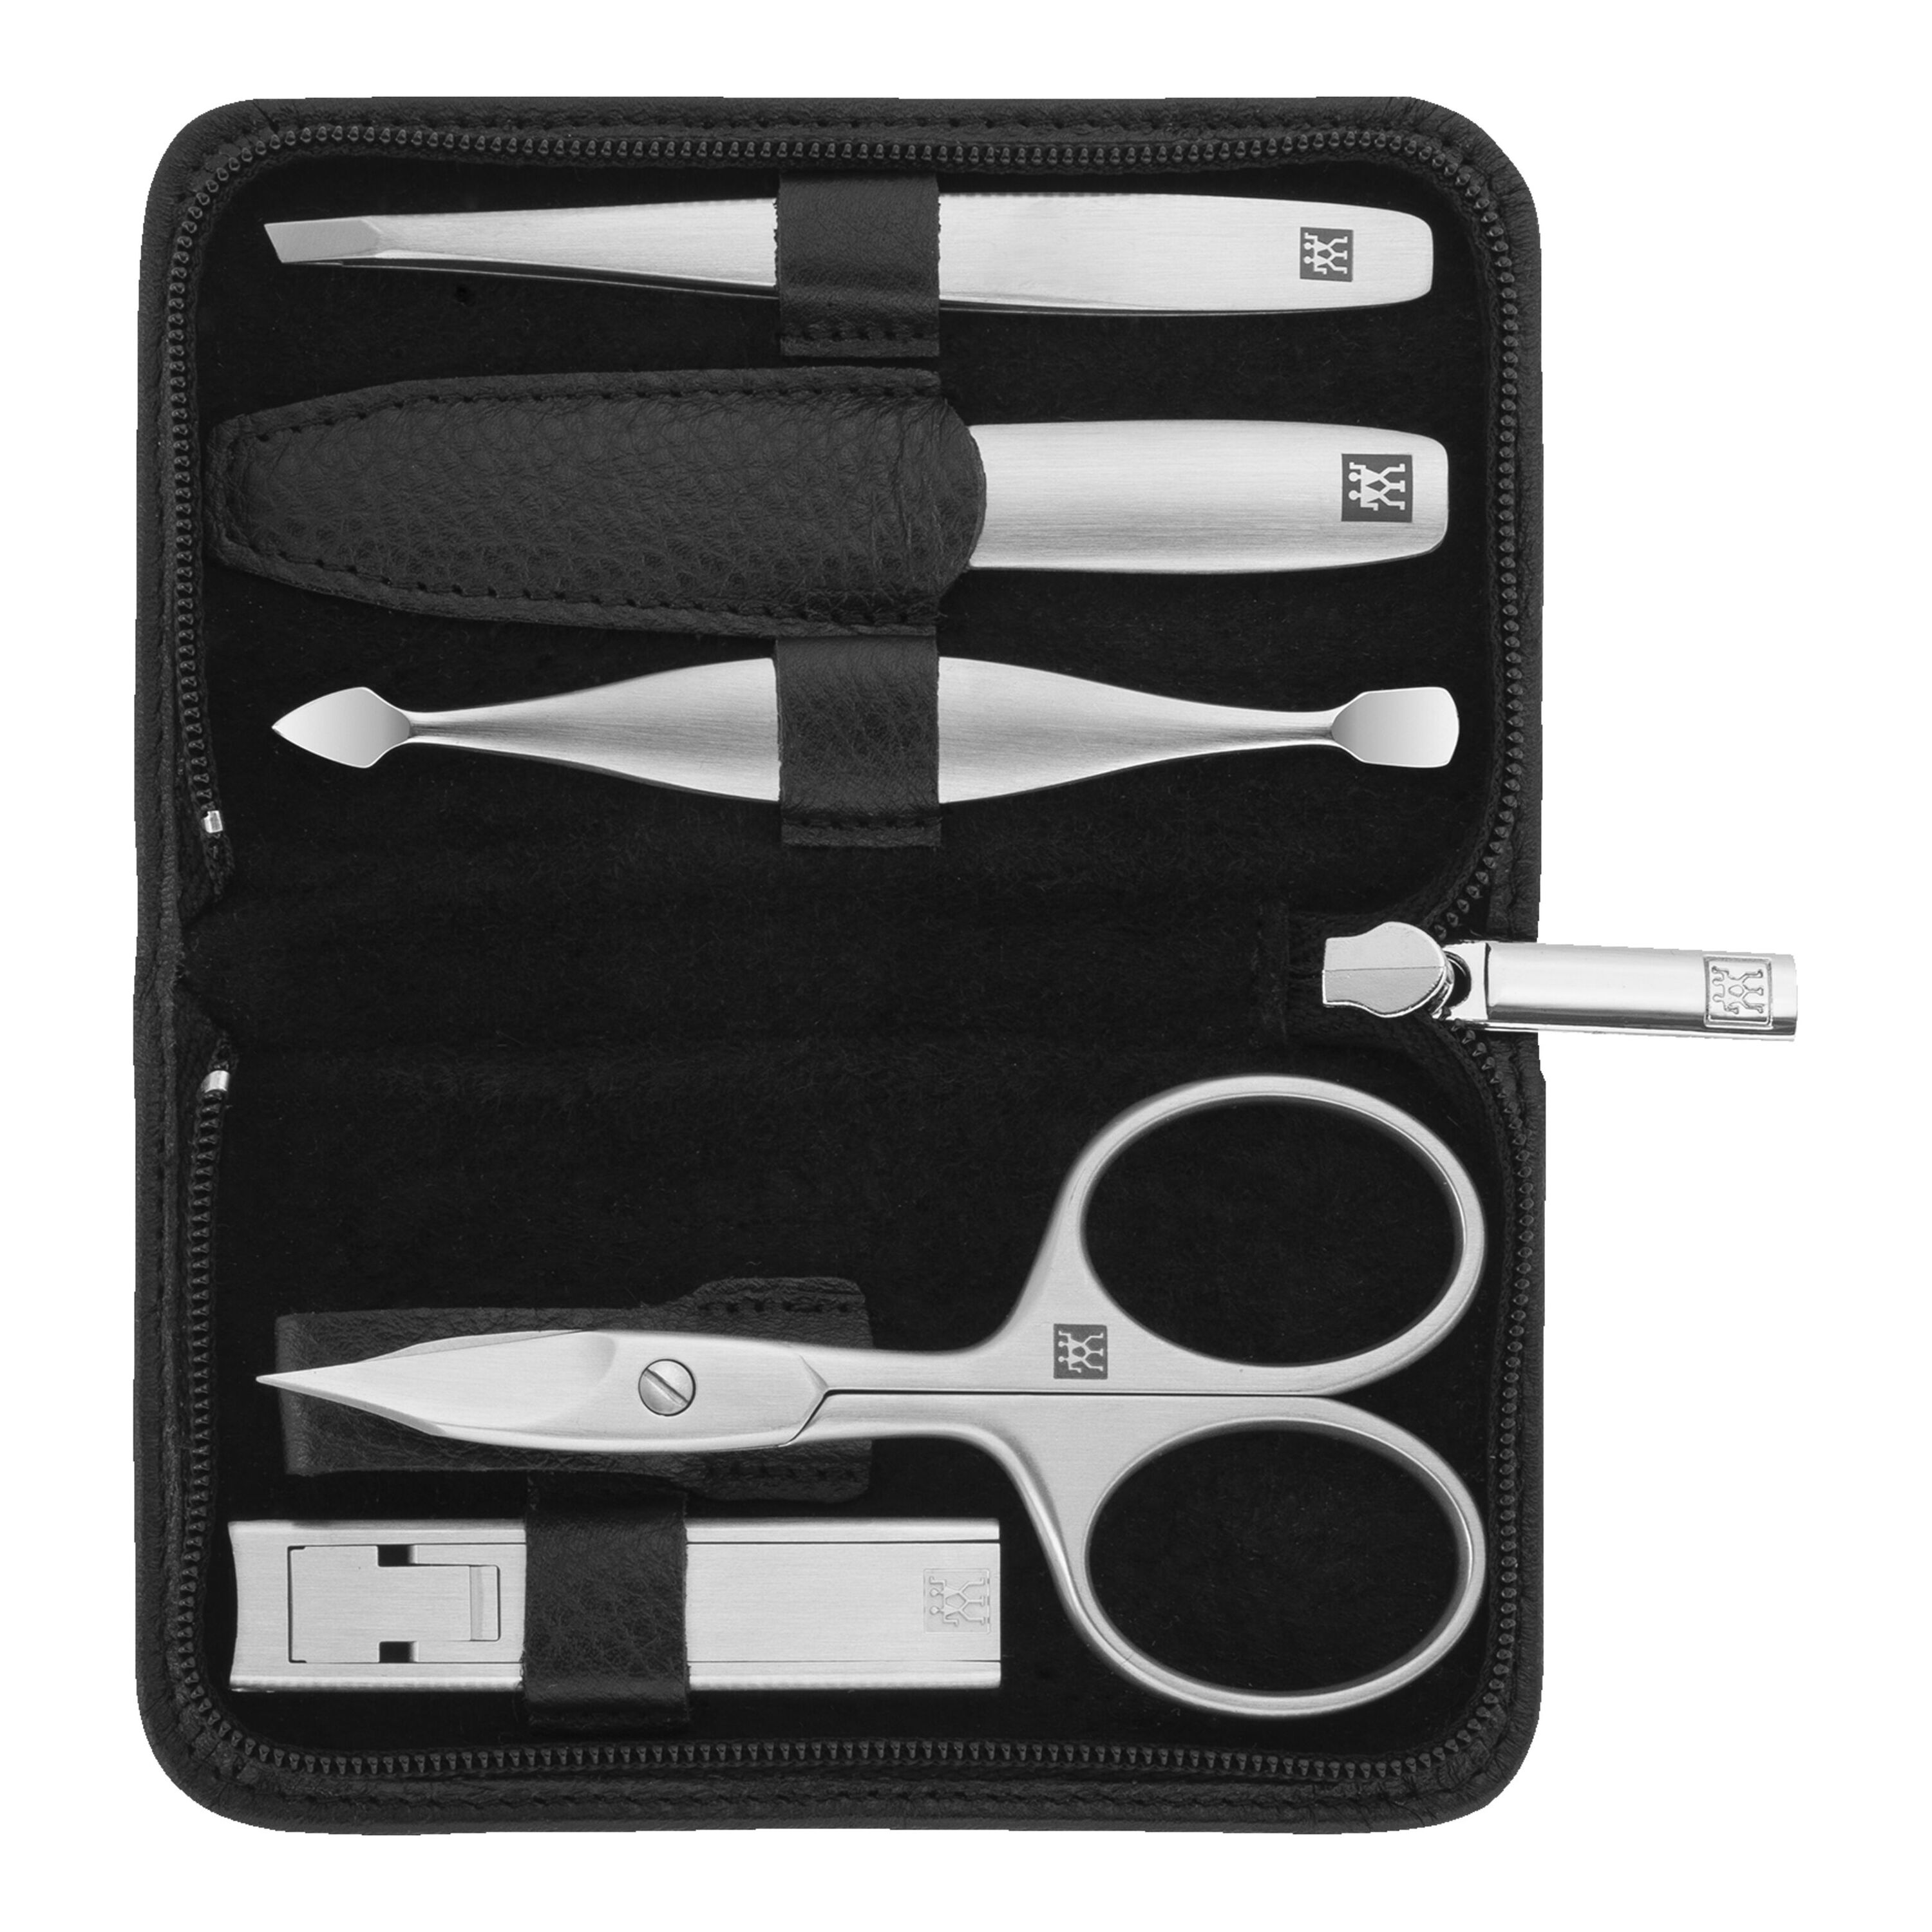 Buy ZWILLING TWINOX Toenail clippers